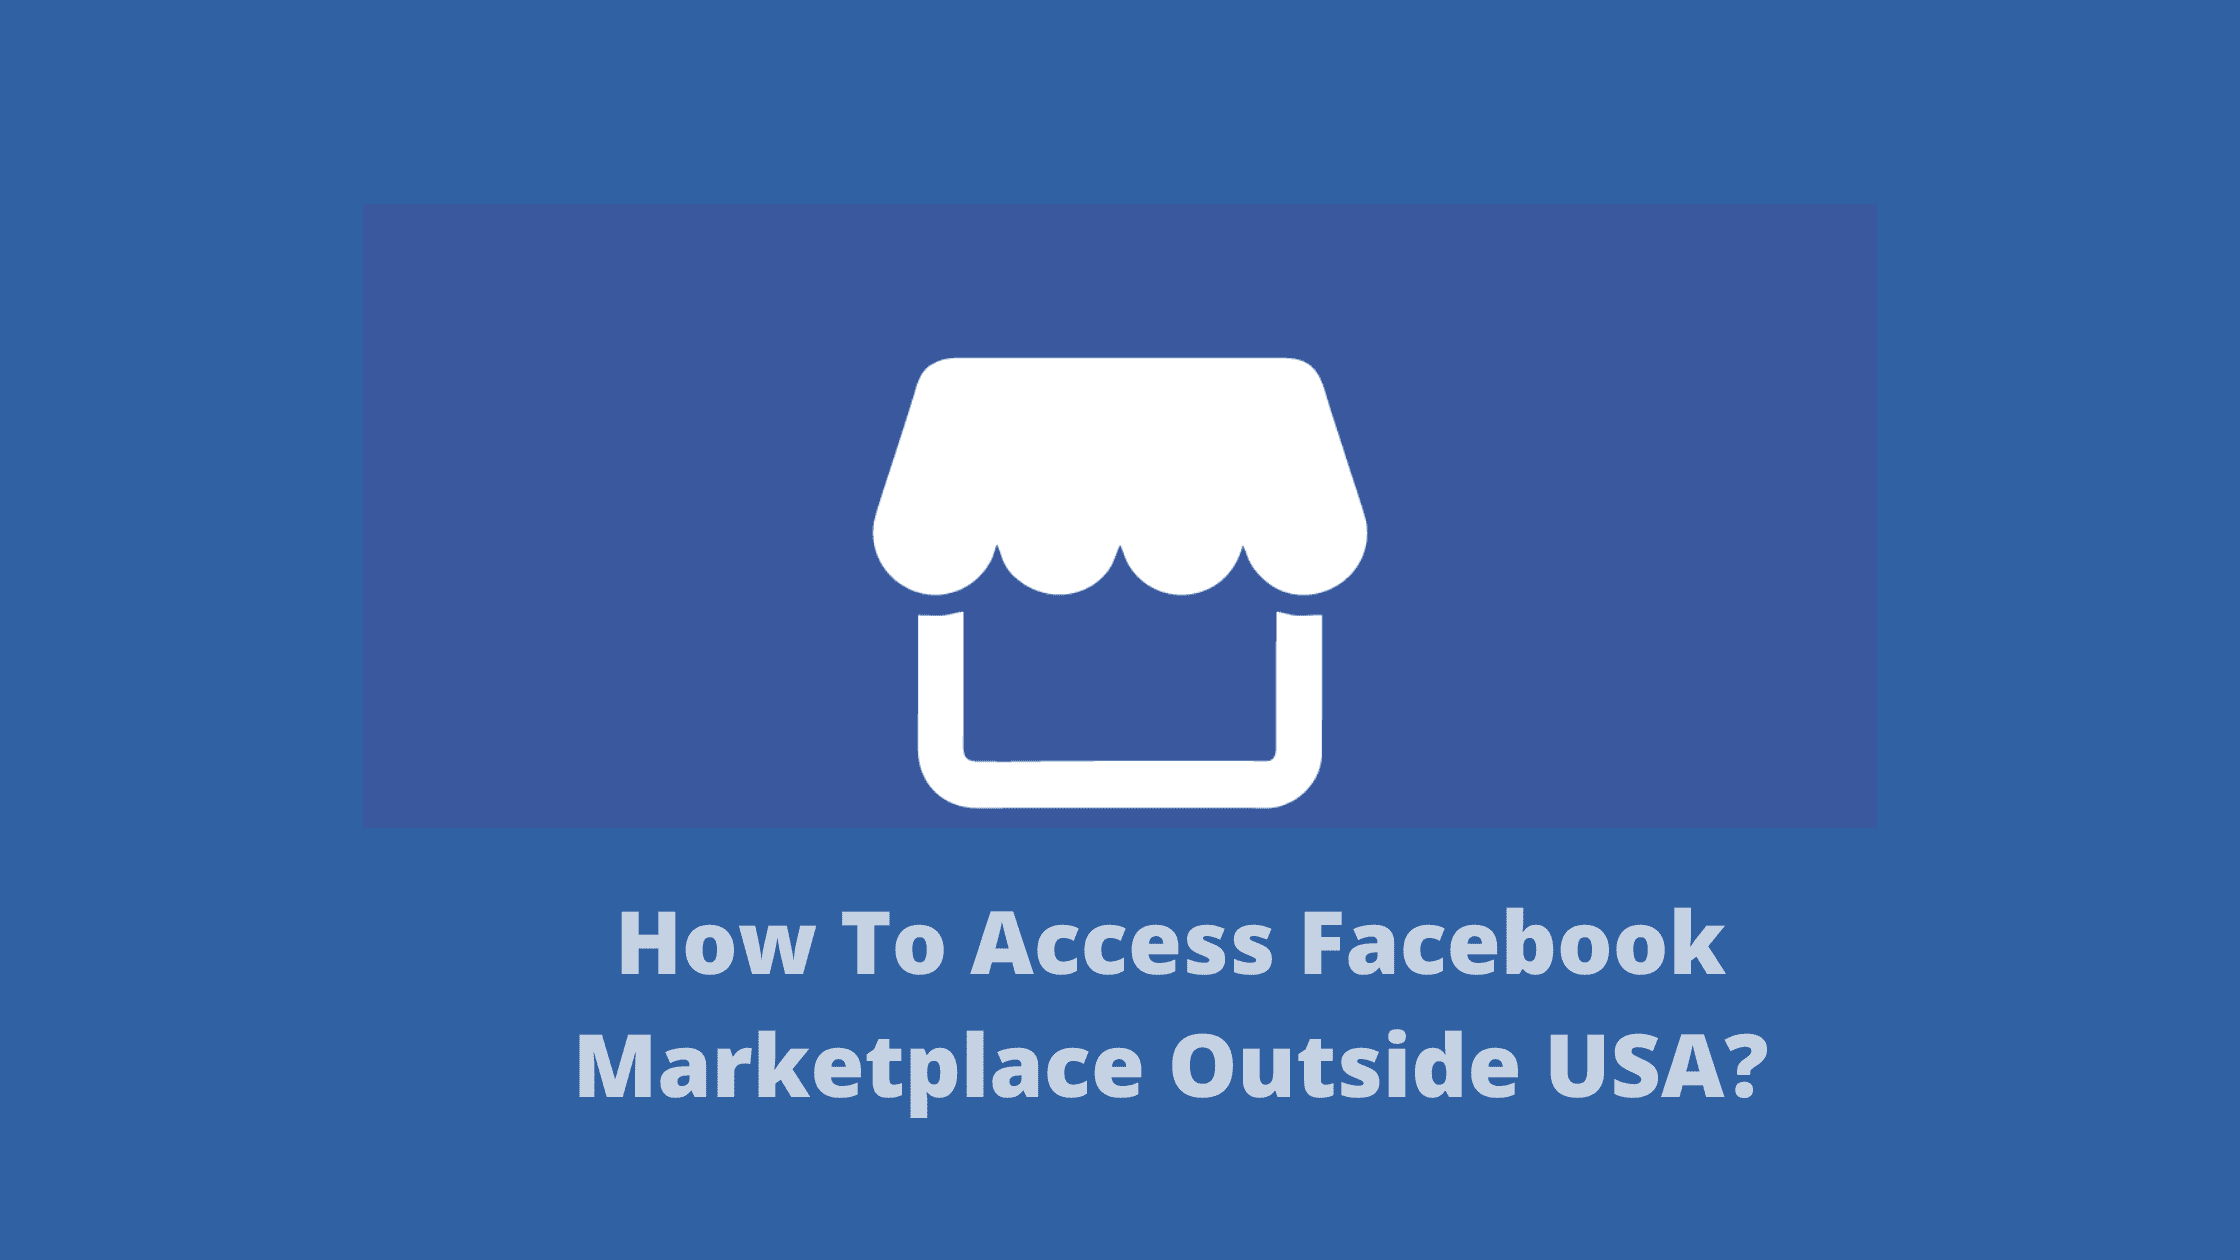 Accessing Facebook Marketplace Outside USA